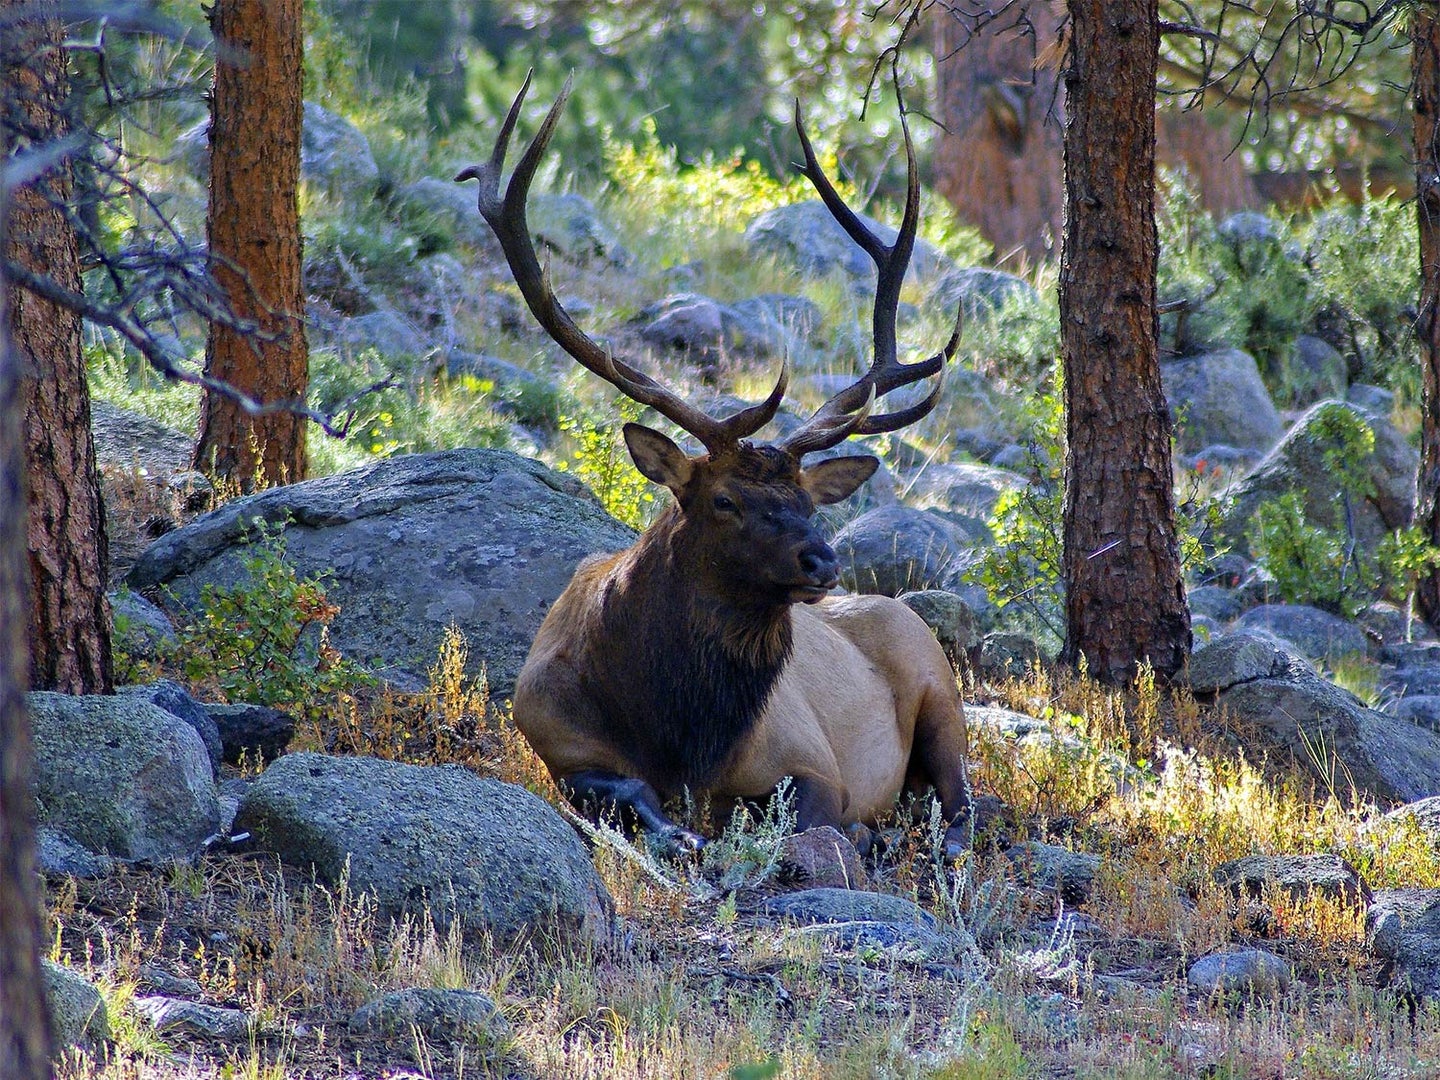 A large bull elk lays in a rocky, grass-filled hillside next two trees.